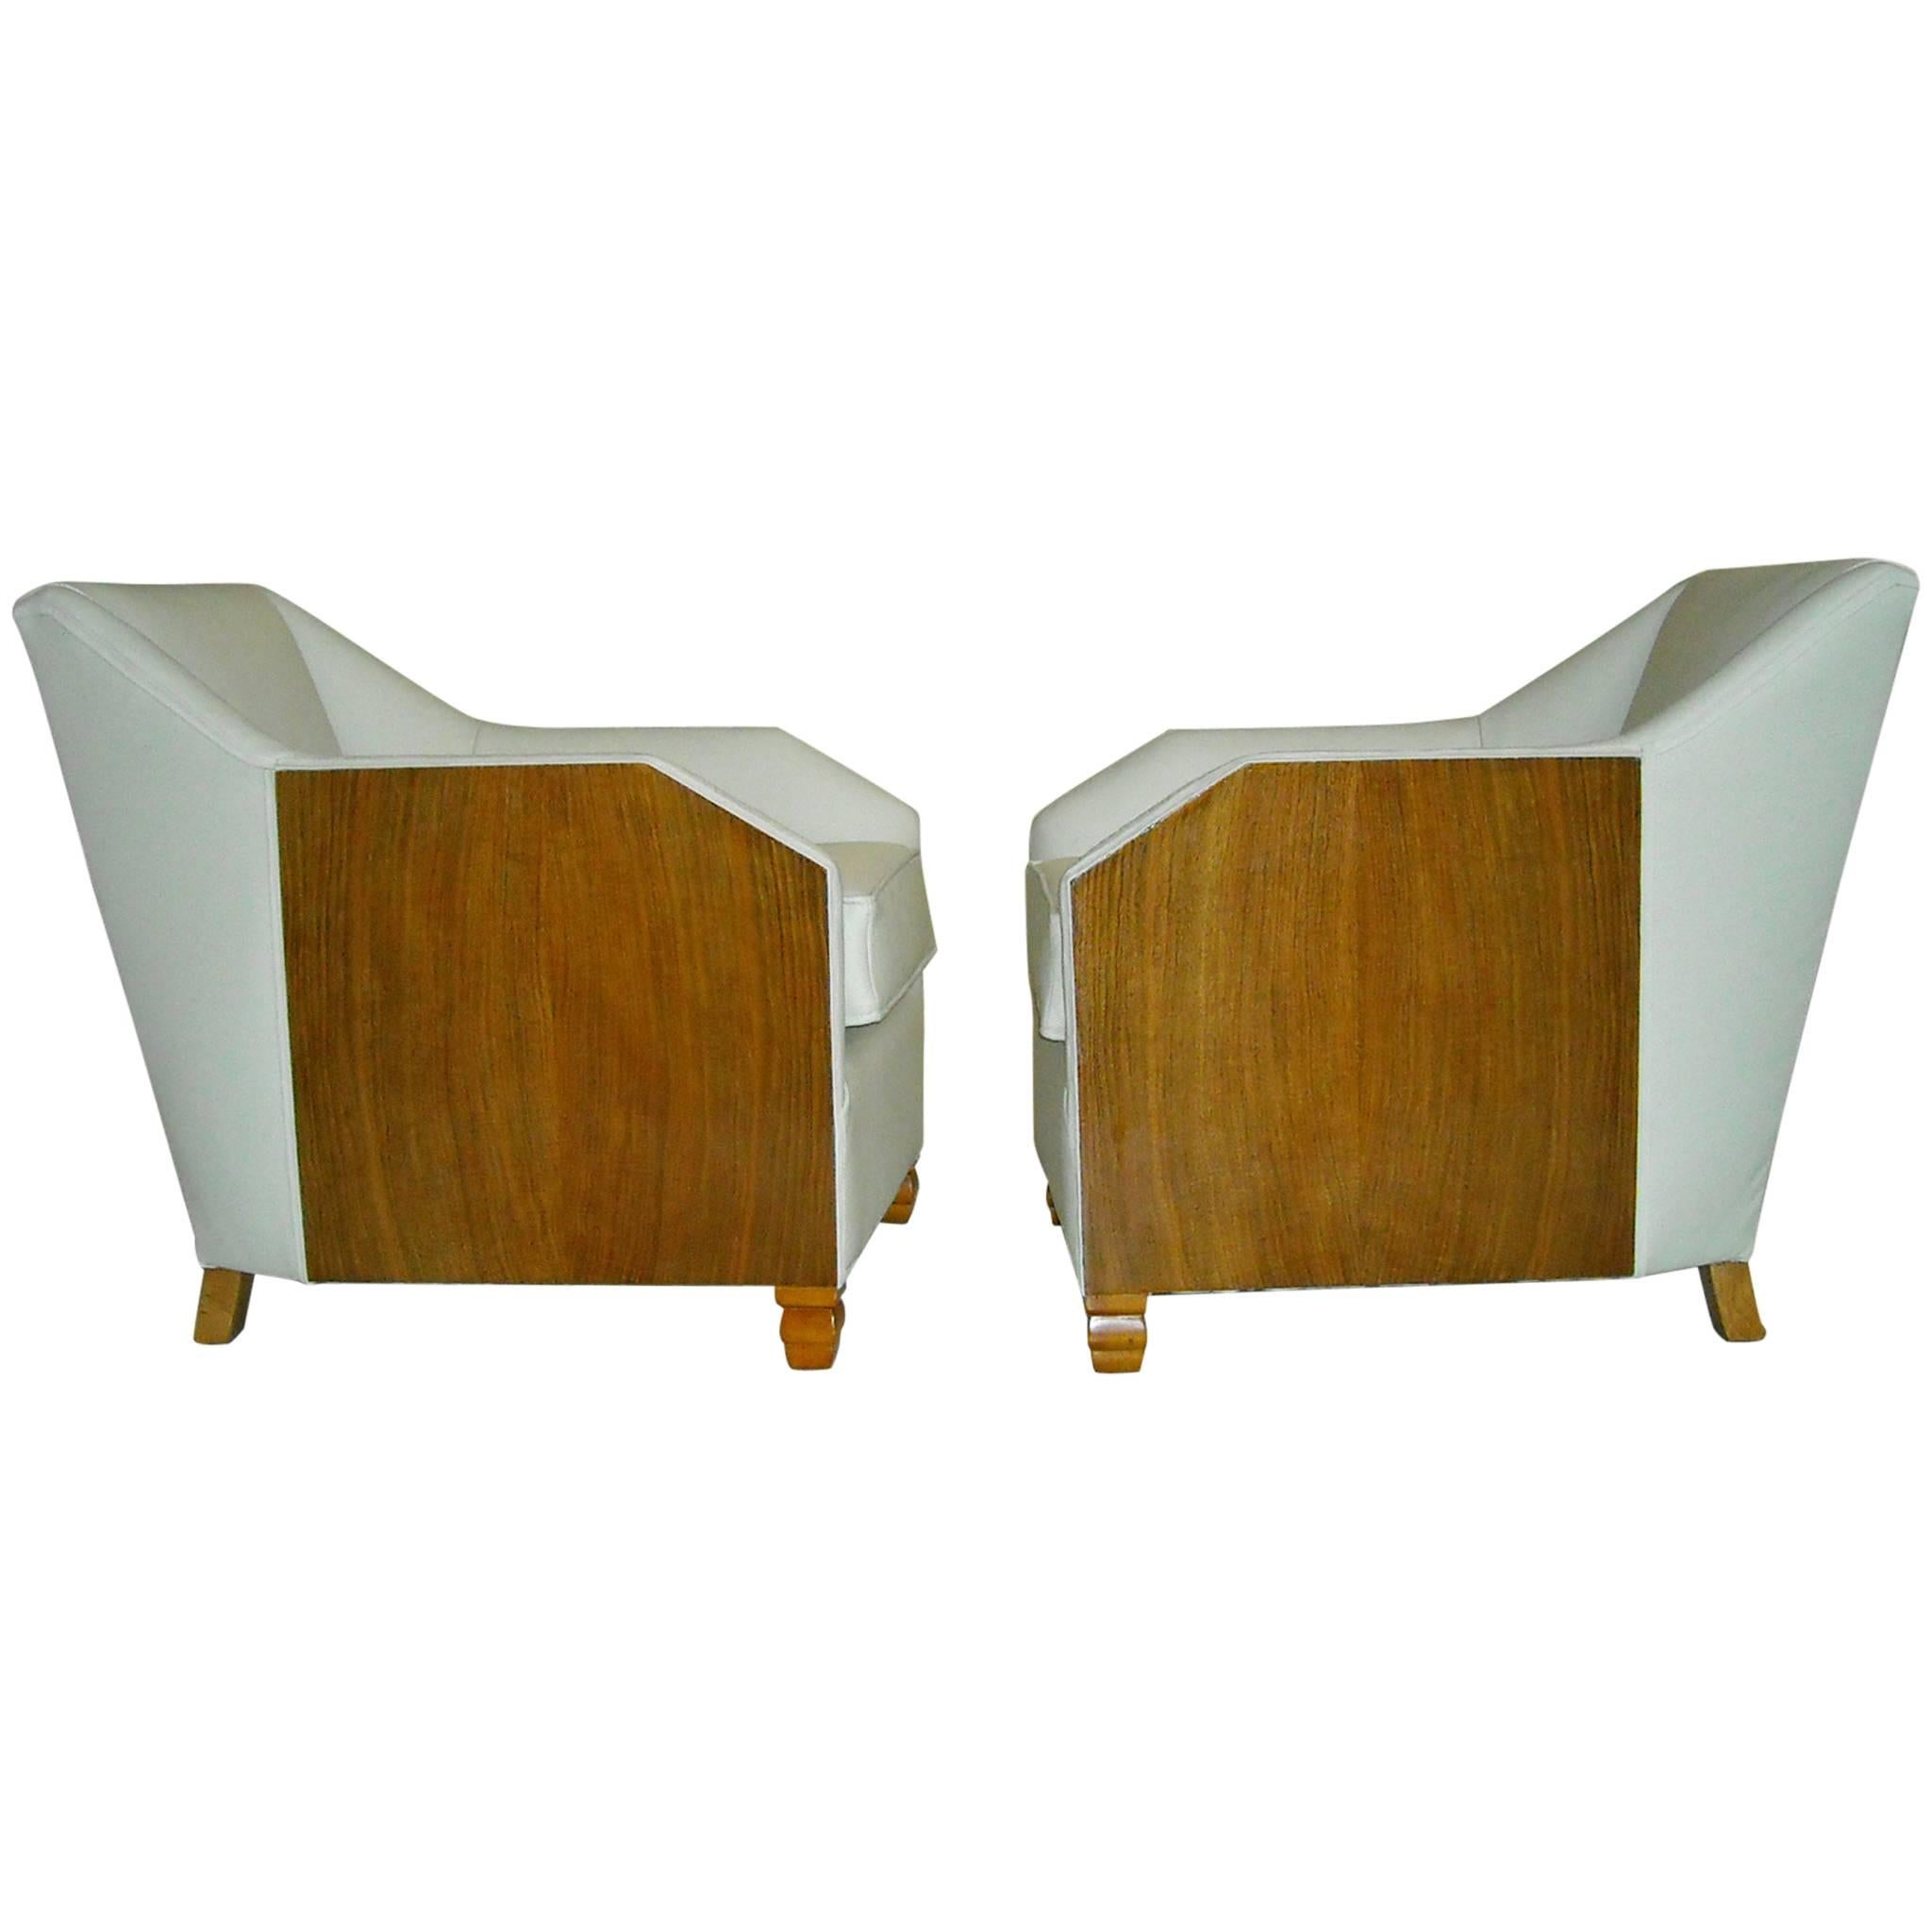 1930 Pair of Armchairs Off-White Leather and Rosewood